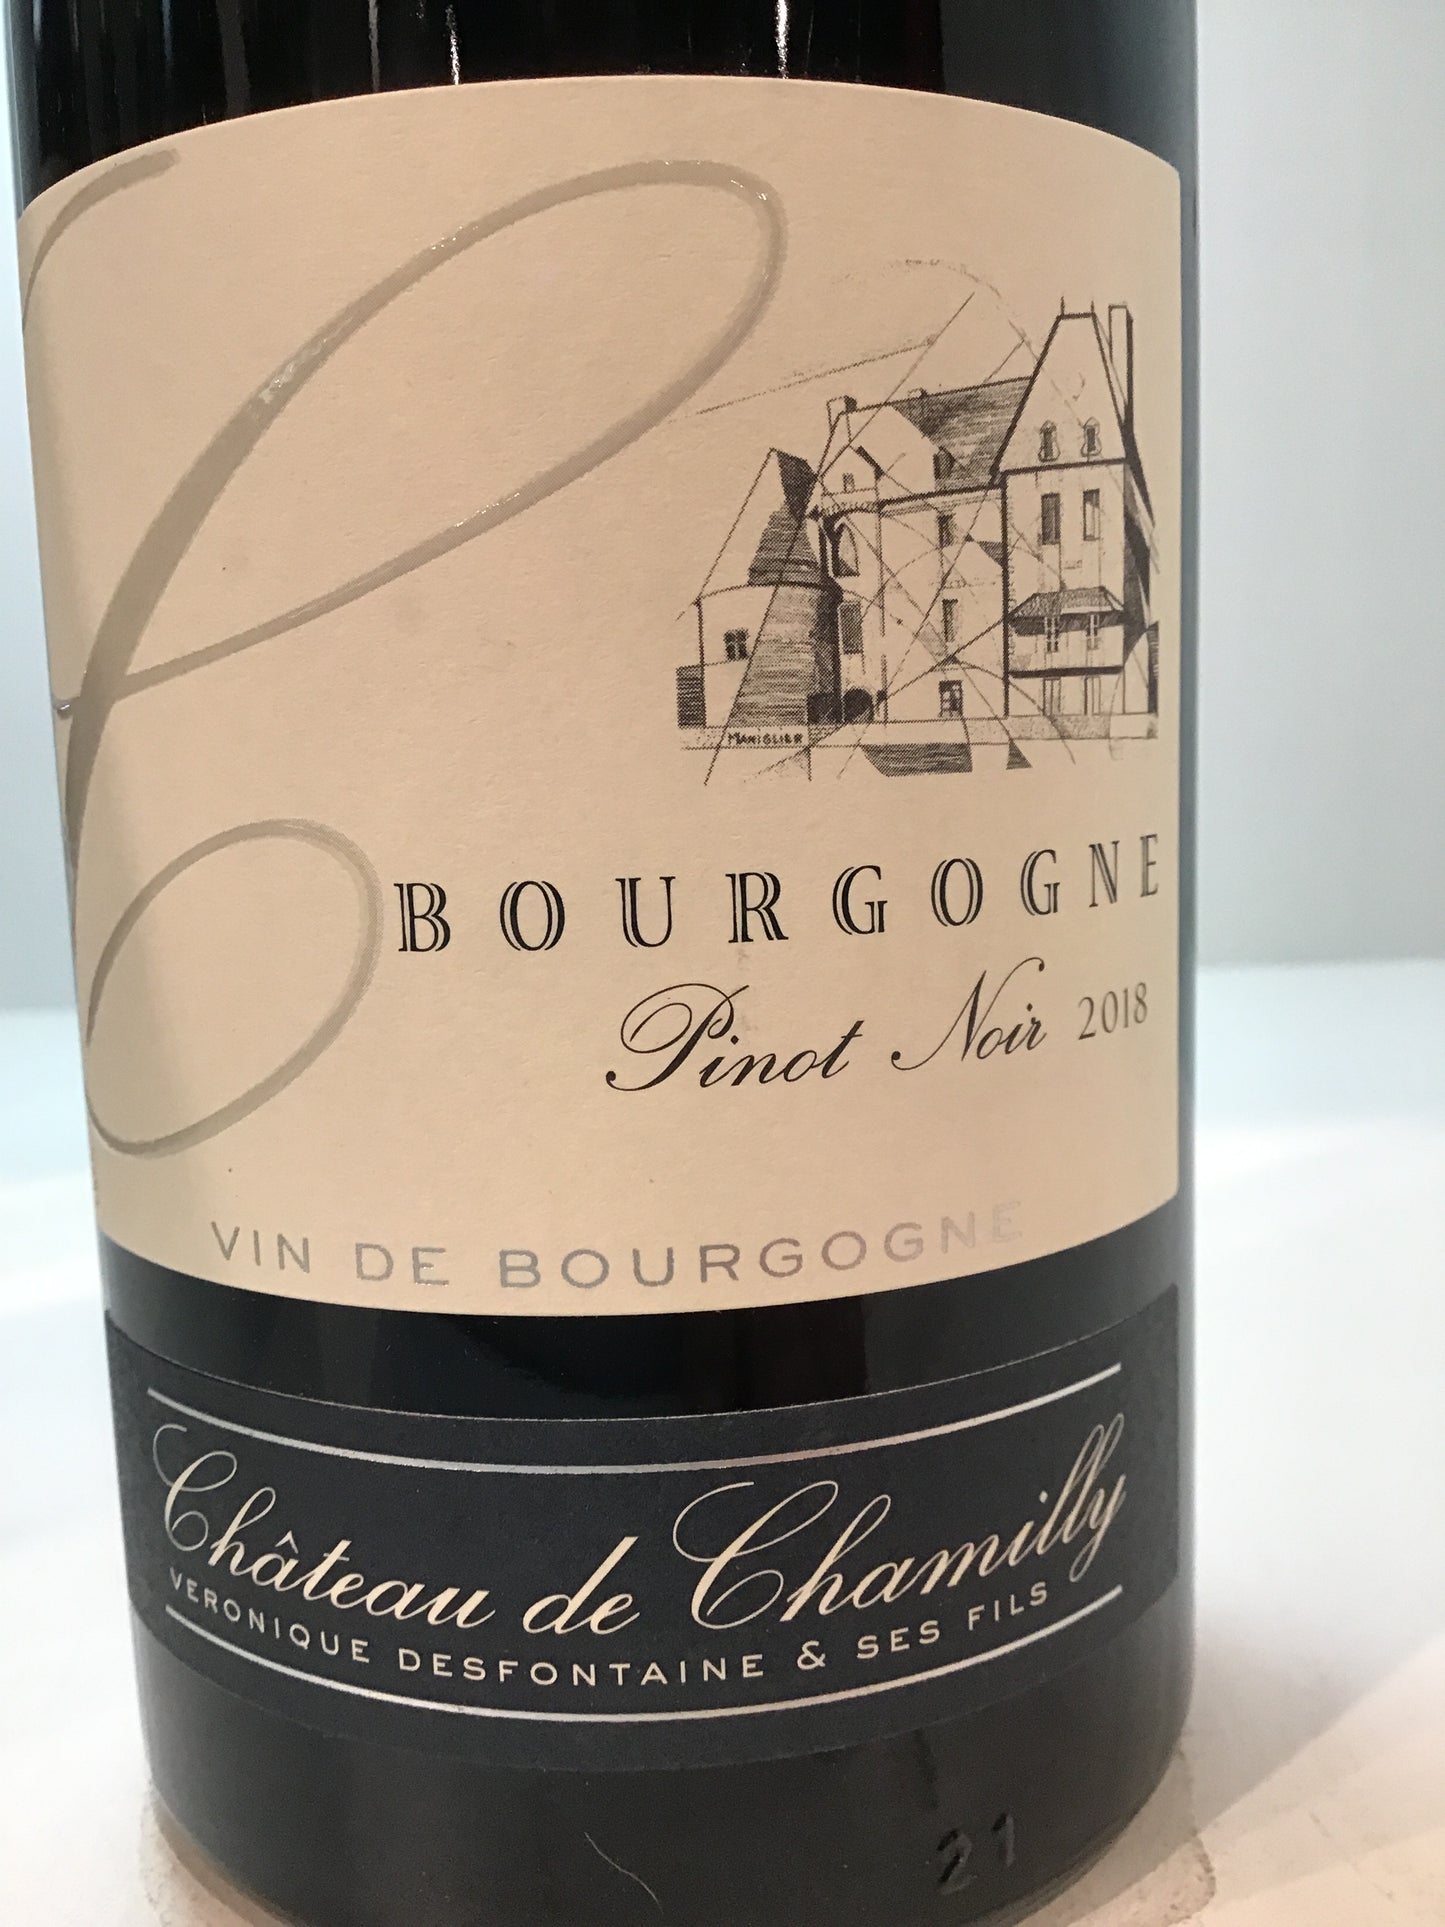 Chateau de Chamilly - Bourgogne - Pinot Noir